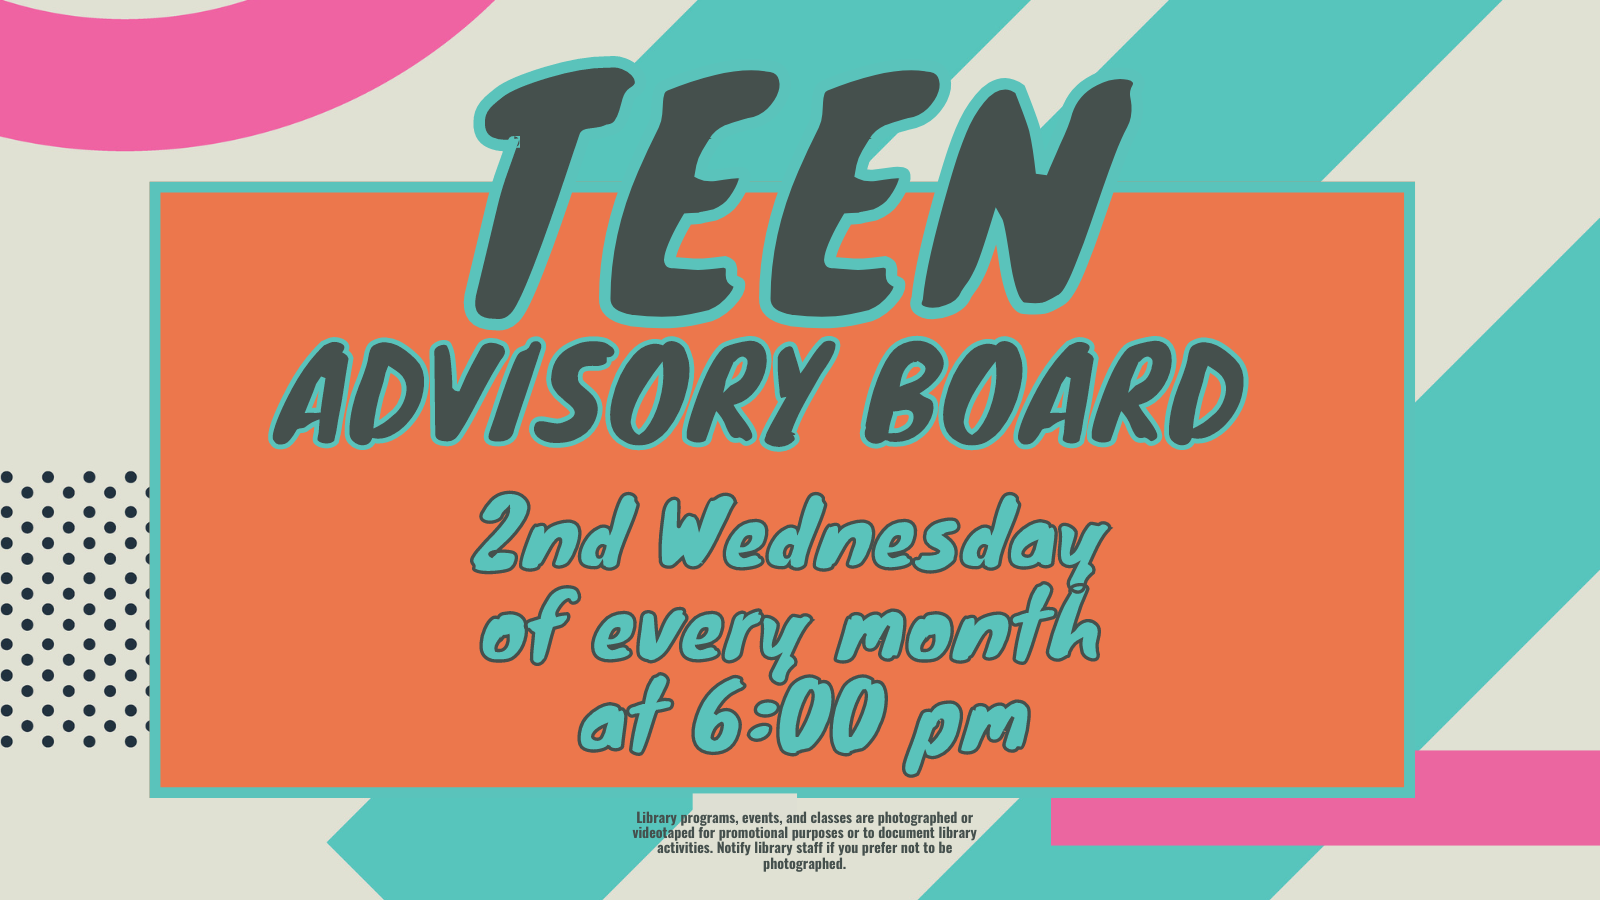 Teen Advisory Board every second Wednesday at 6:00 pm